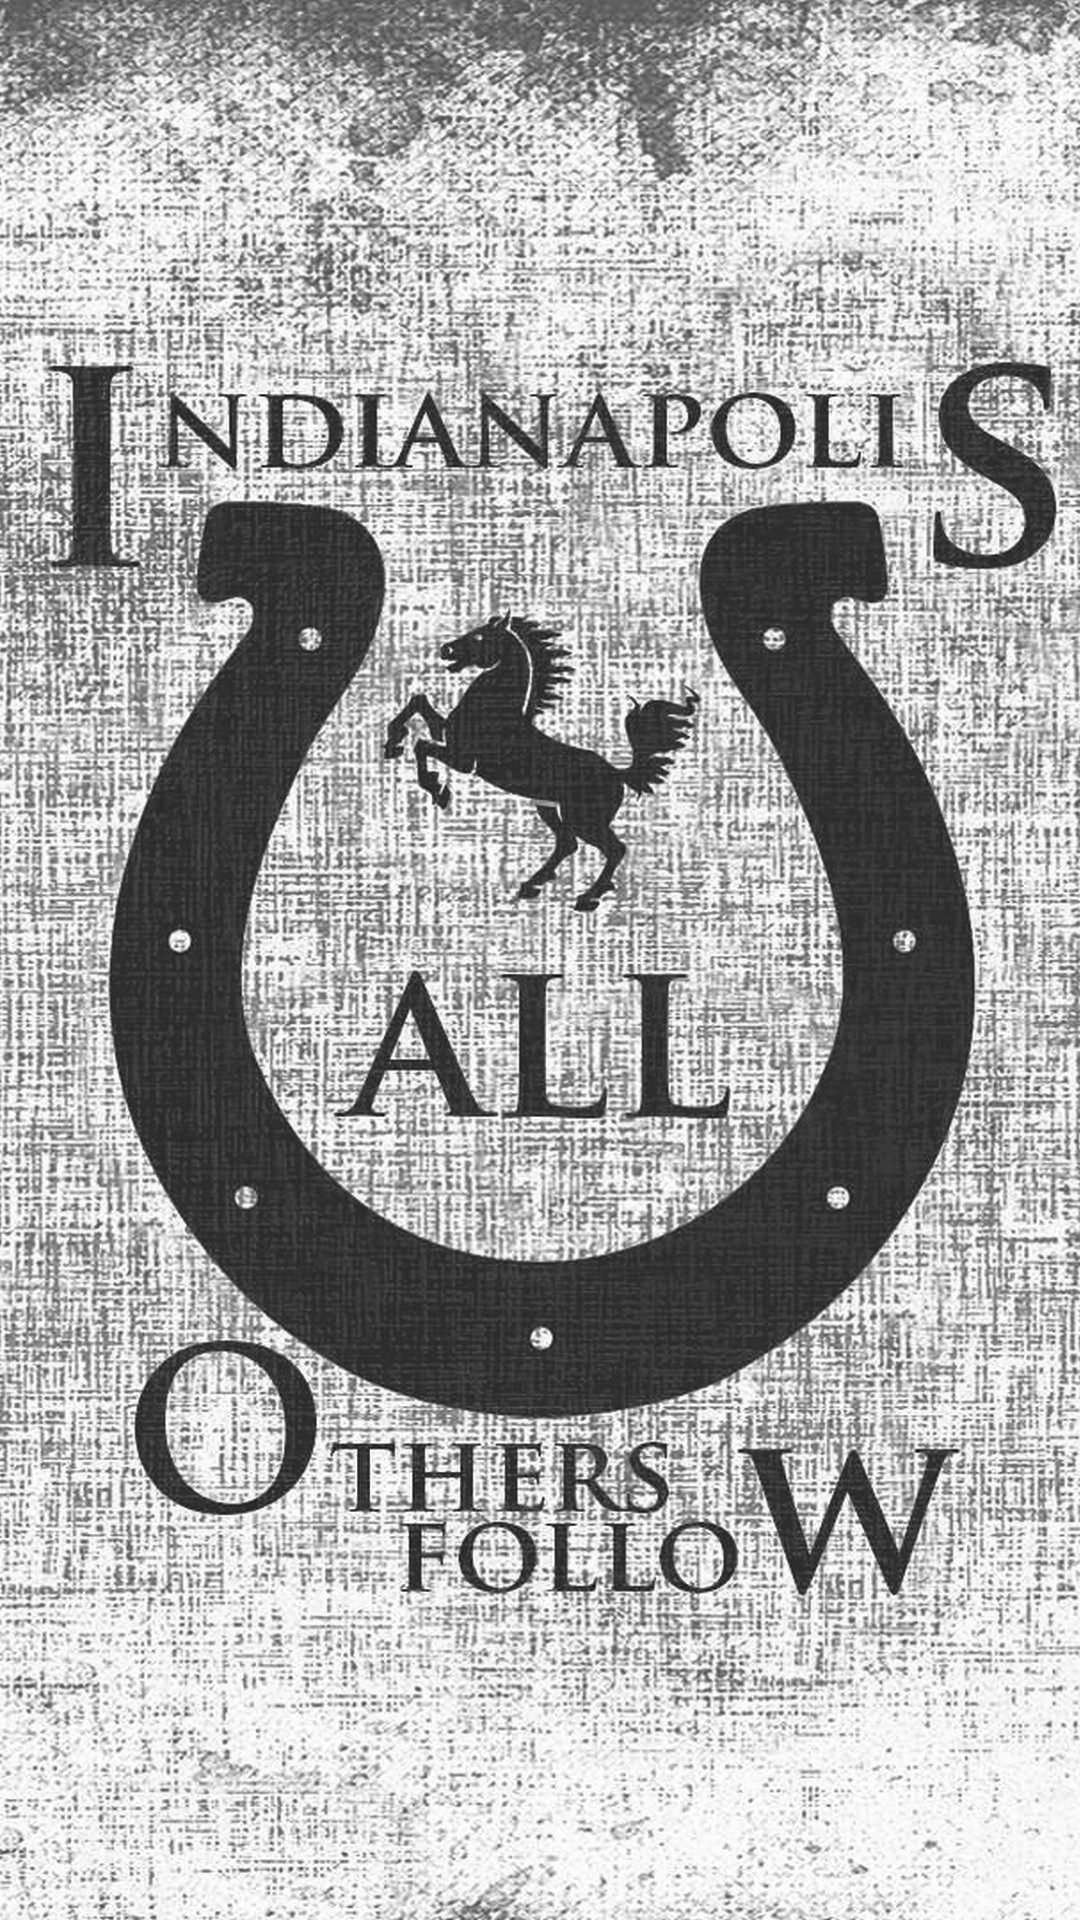 Indianapolis Colts NFL iPhone Wallpaper High Quality With high-resolution 1080X1920 pixel. Donwload and set as wallpaper for your iPhone X, iPhone XS home screen backgrounds, XS Max, XR, iPhone8 lock screen wallpaper, iPhone 7, 6, SE, and other mobile devices